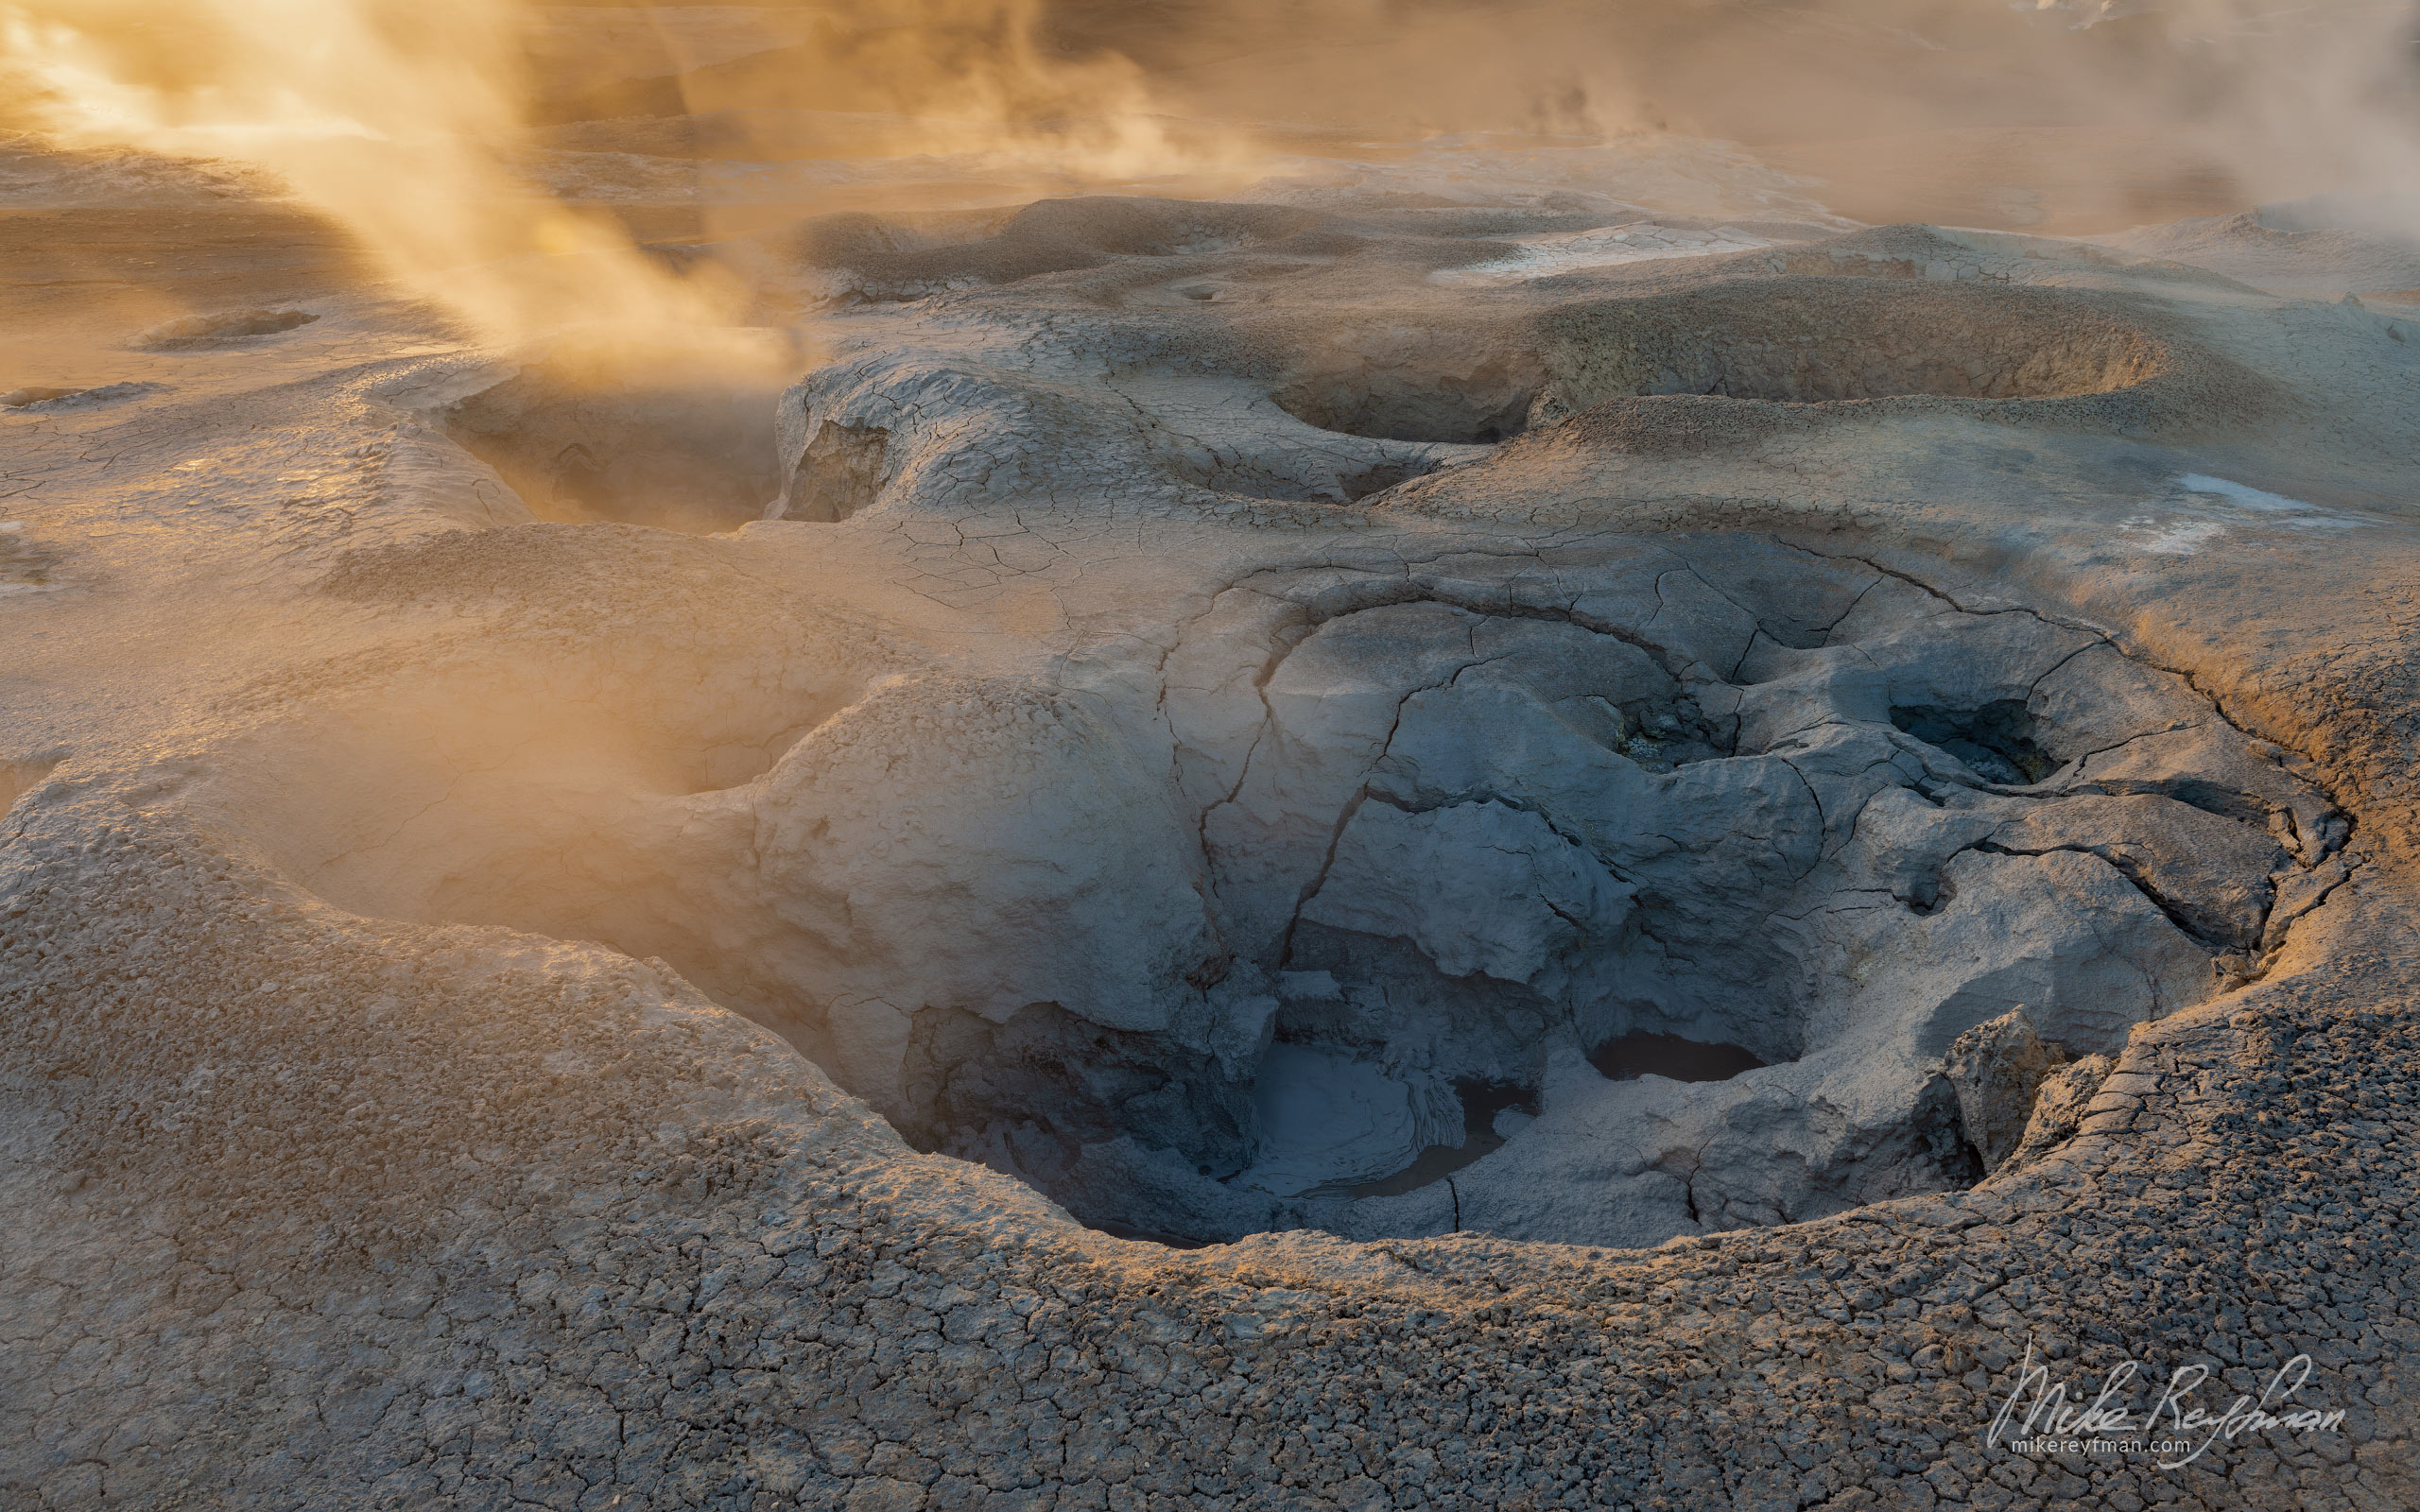 Namafjall - Hverir Geothermal Area. Lake Myvatn region, Iceland 044-IC-GP _D8B1866 - Rhyolite Mountains, Crater Lakes, Geothermal Areas, Lava Fields and Glacial Rivers. Iceland.  - Mike Reyfman Photography